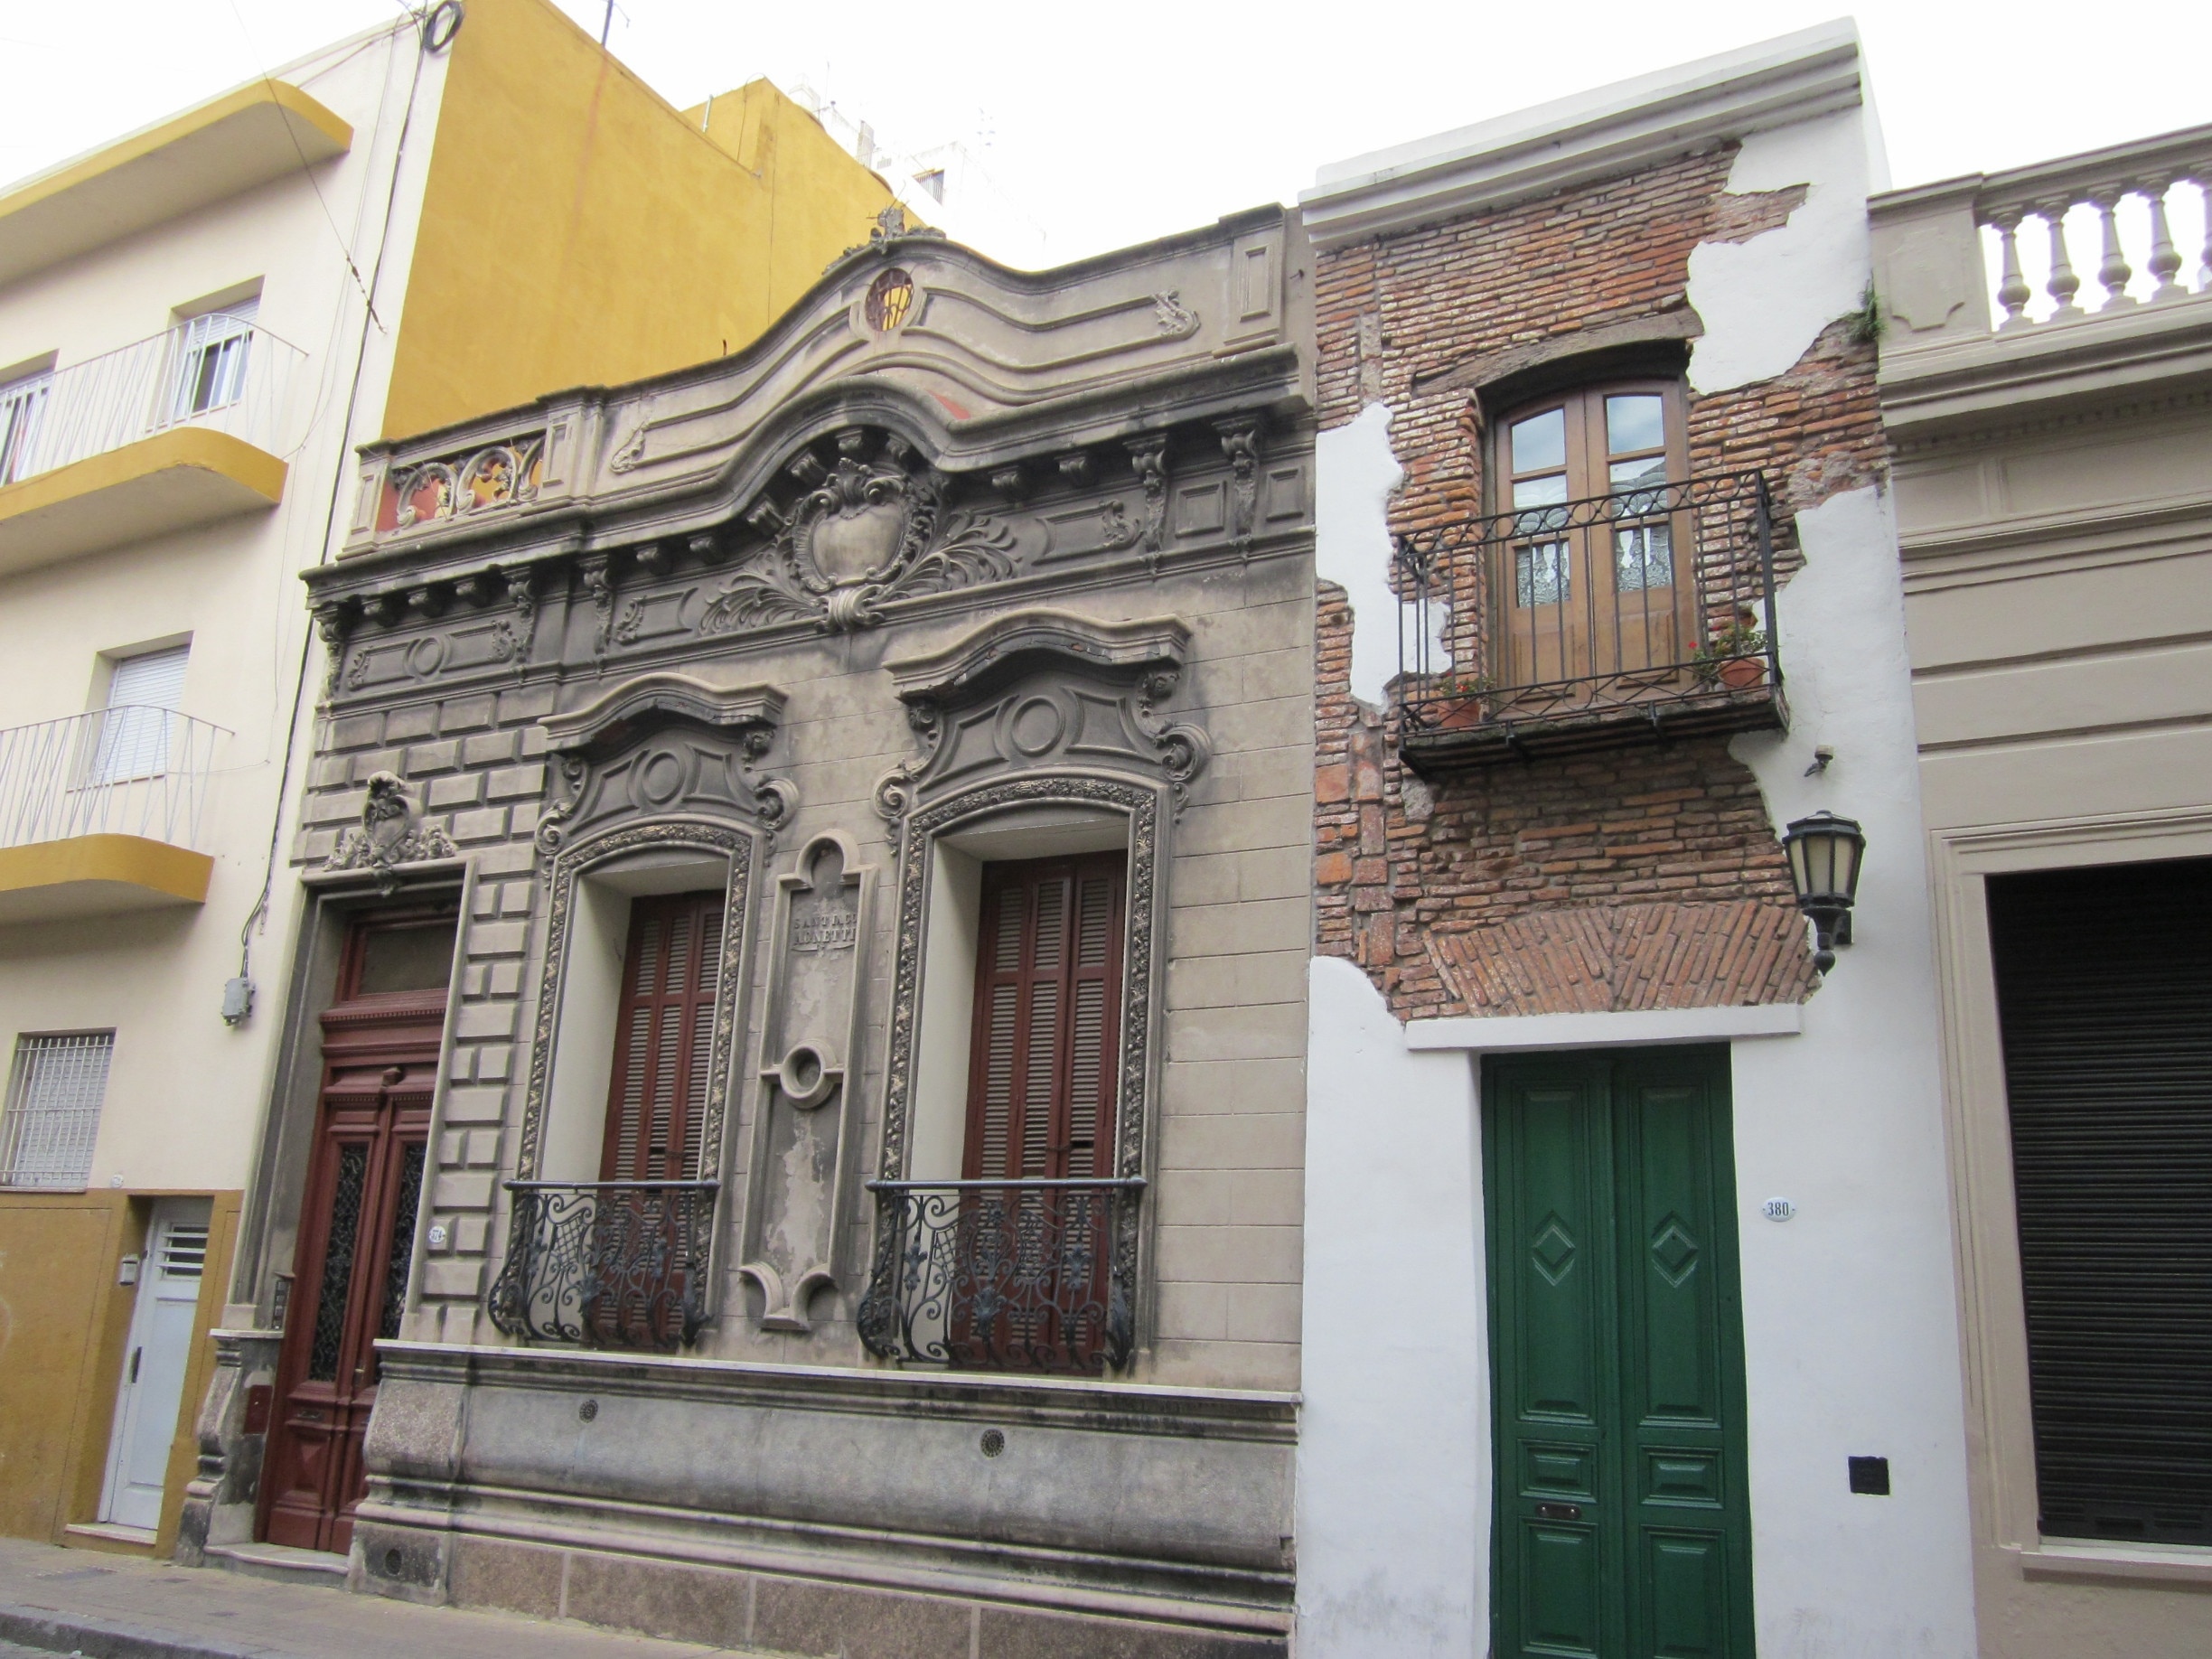 Located in San Telmo, Casa Minima is known as the narrowest house in Buenos Aires, at 2.5 meters wide. 